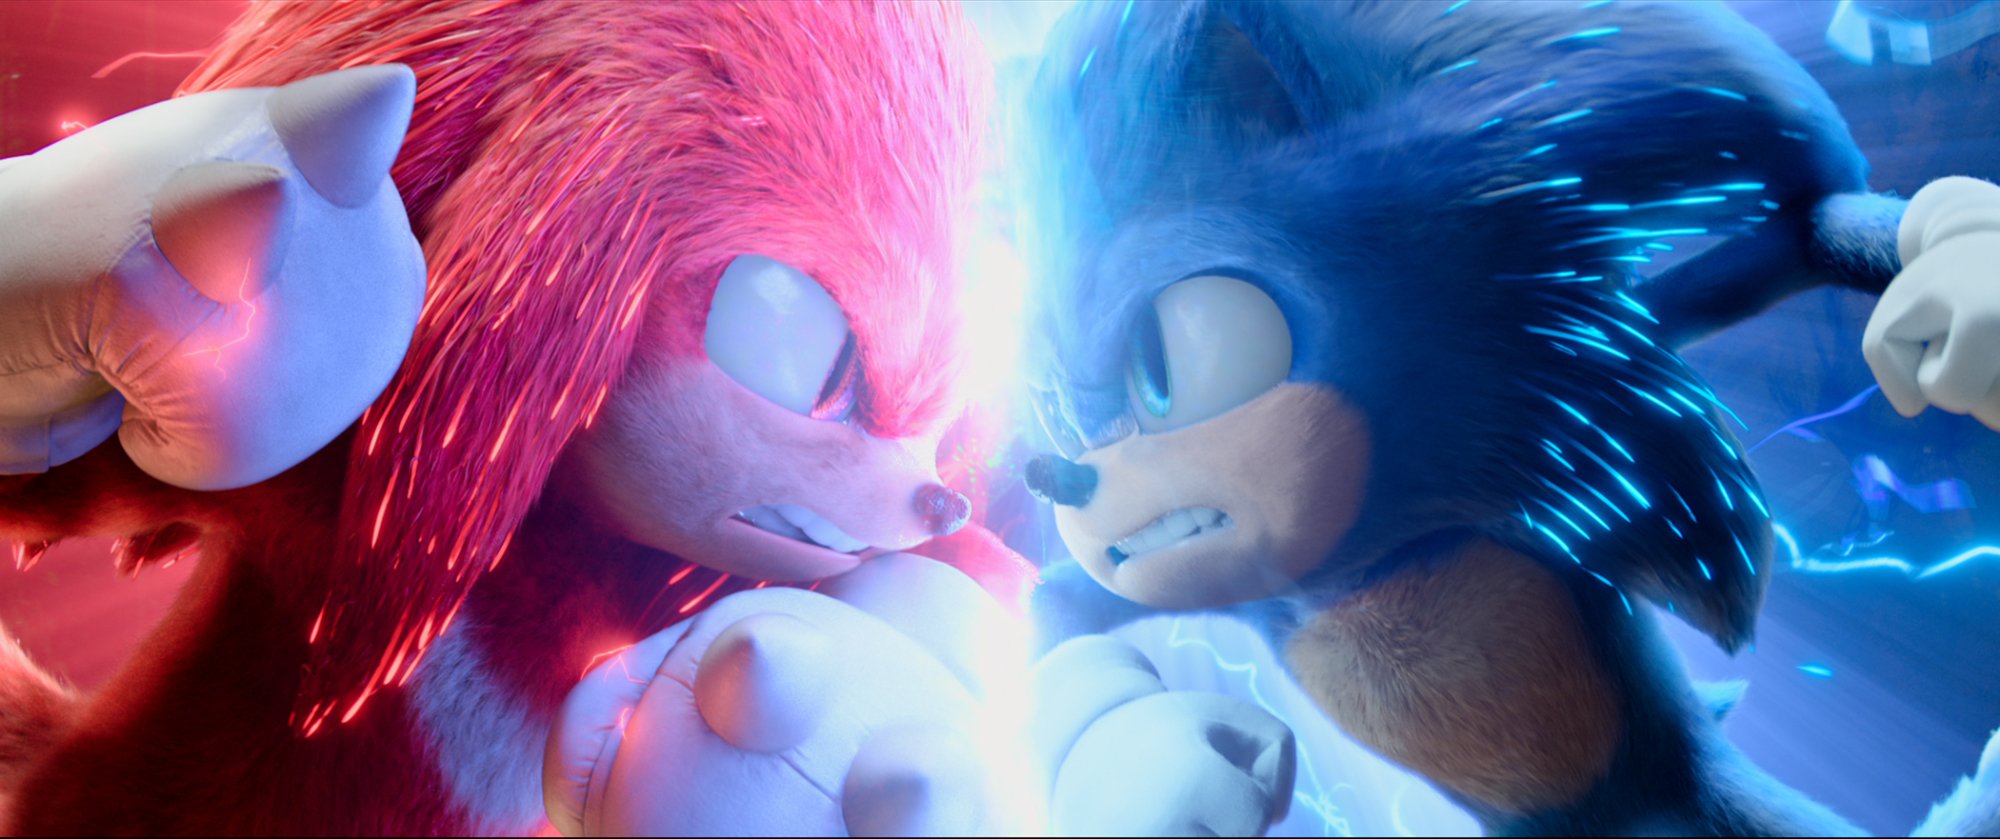 'Sonic the Hedgehog 2' Knuckles (voiced by Idris Elba) and Sonic (voiced by Ben Schwartz) colliding with each other with energy in between them